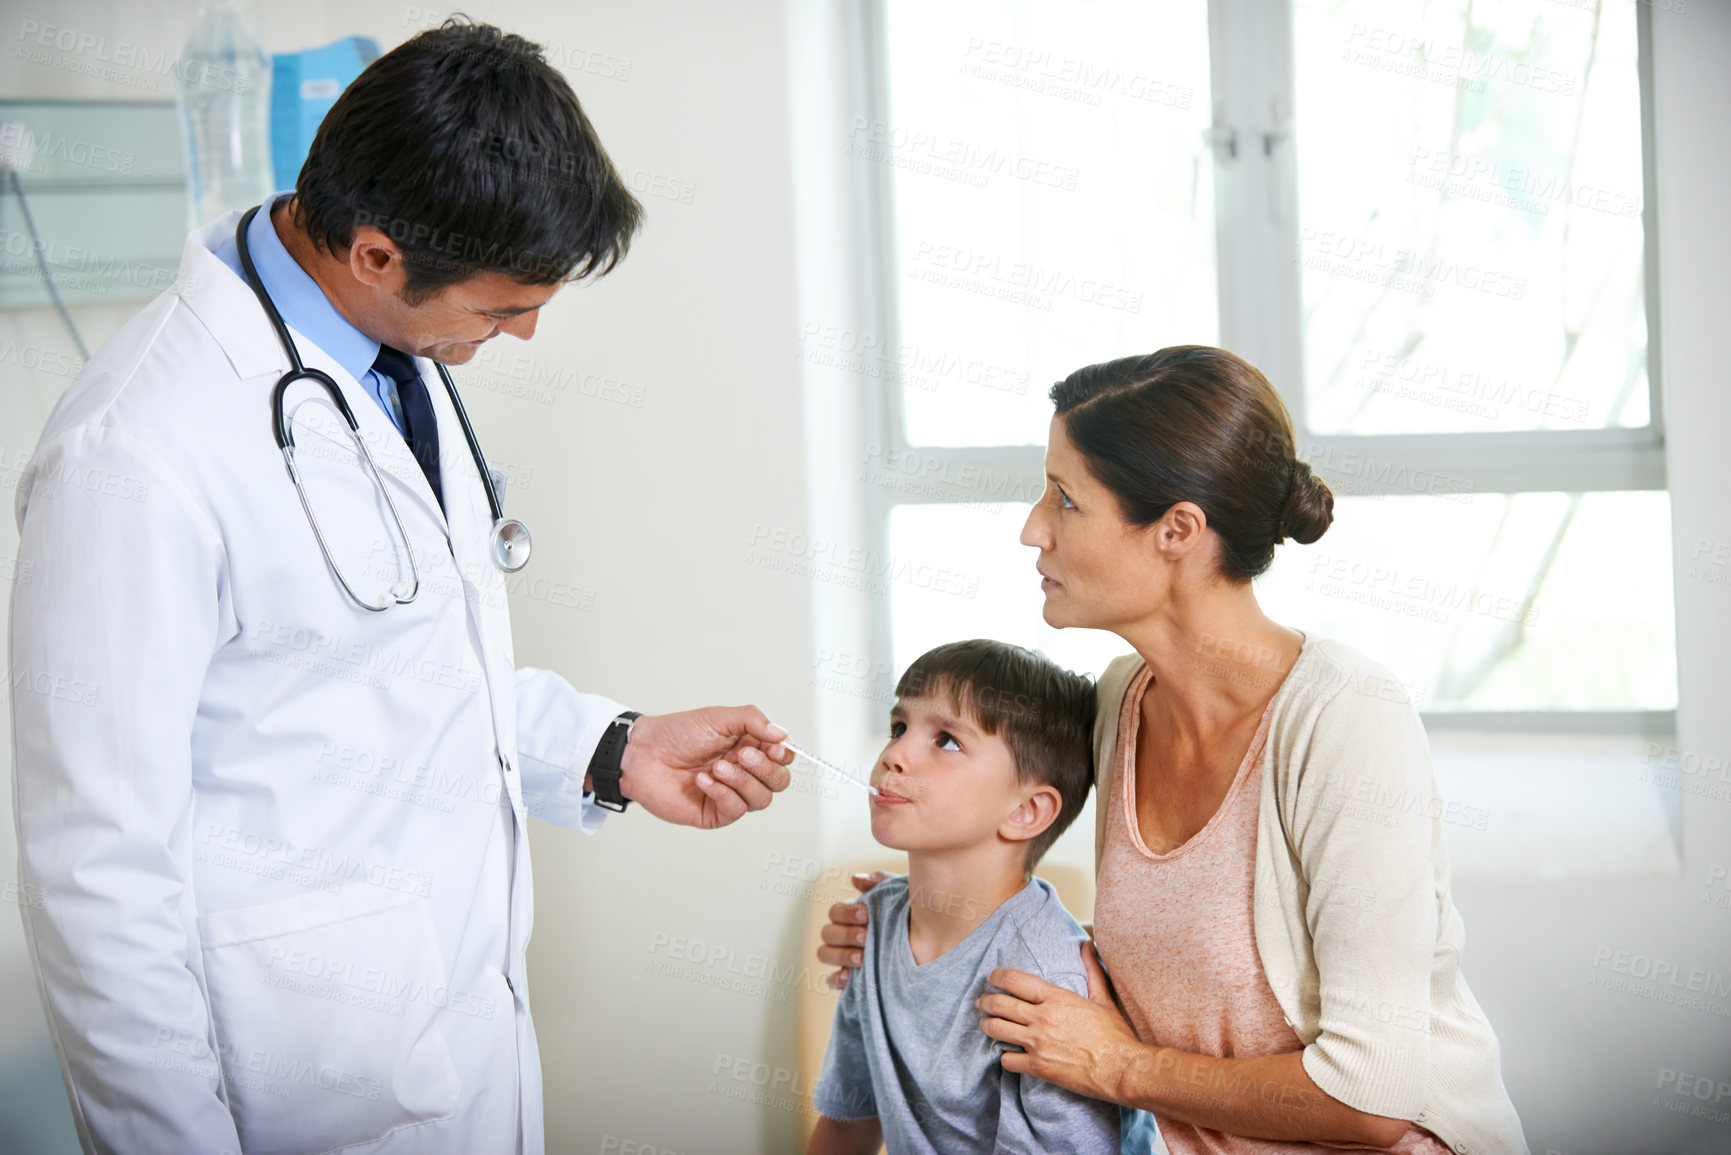 Buy stock photo The family doctor takes a young boy's tempreture while his mother holds him